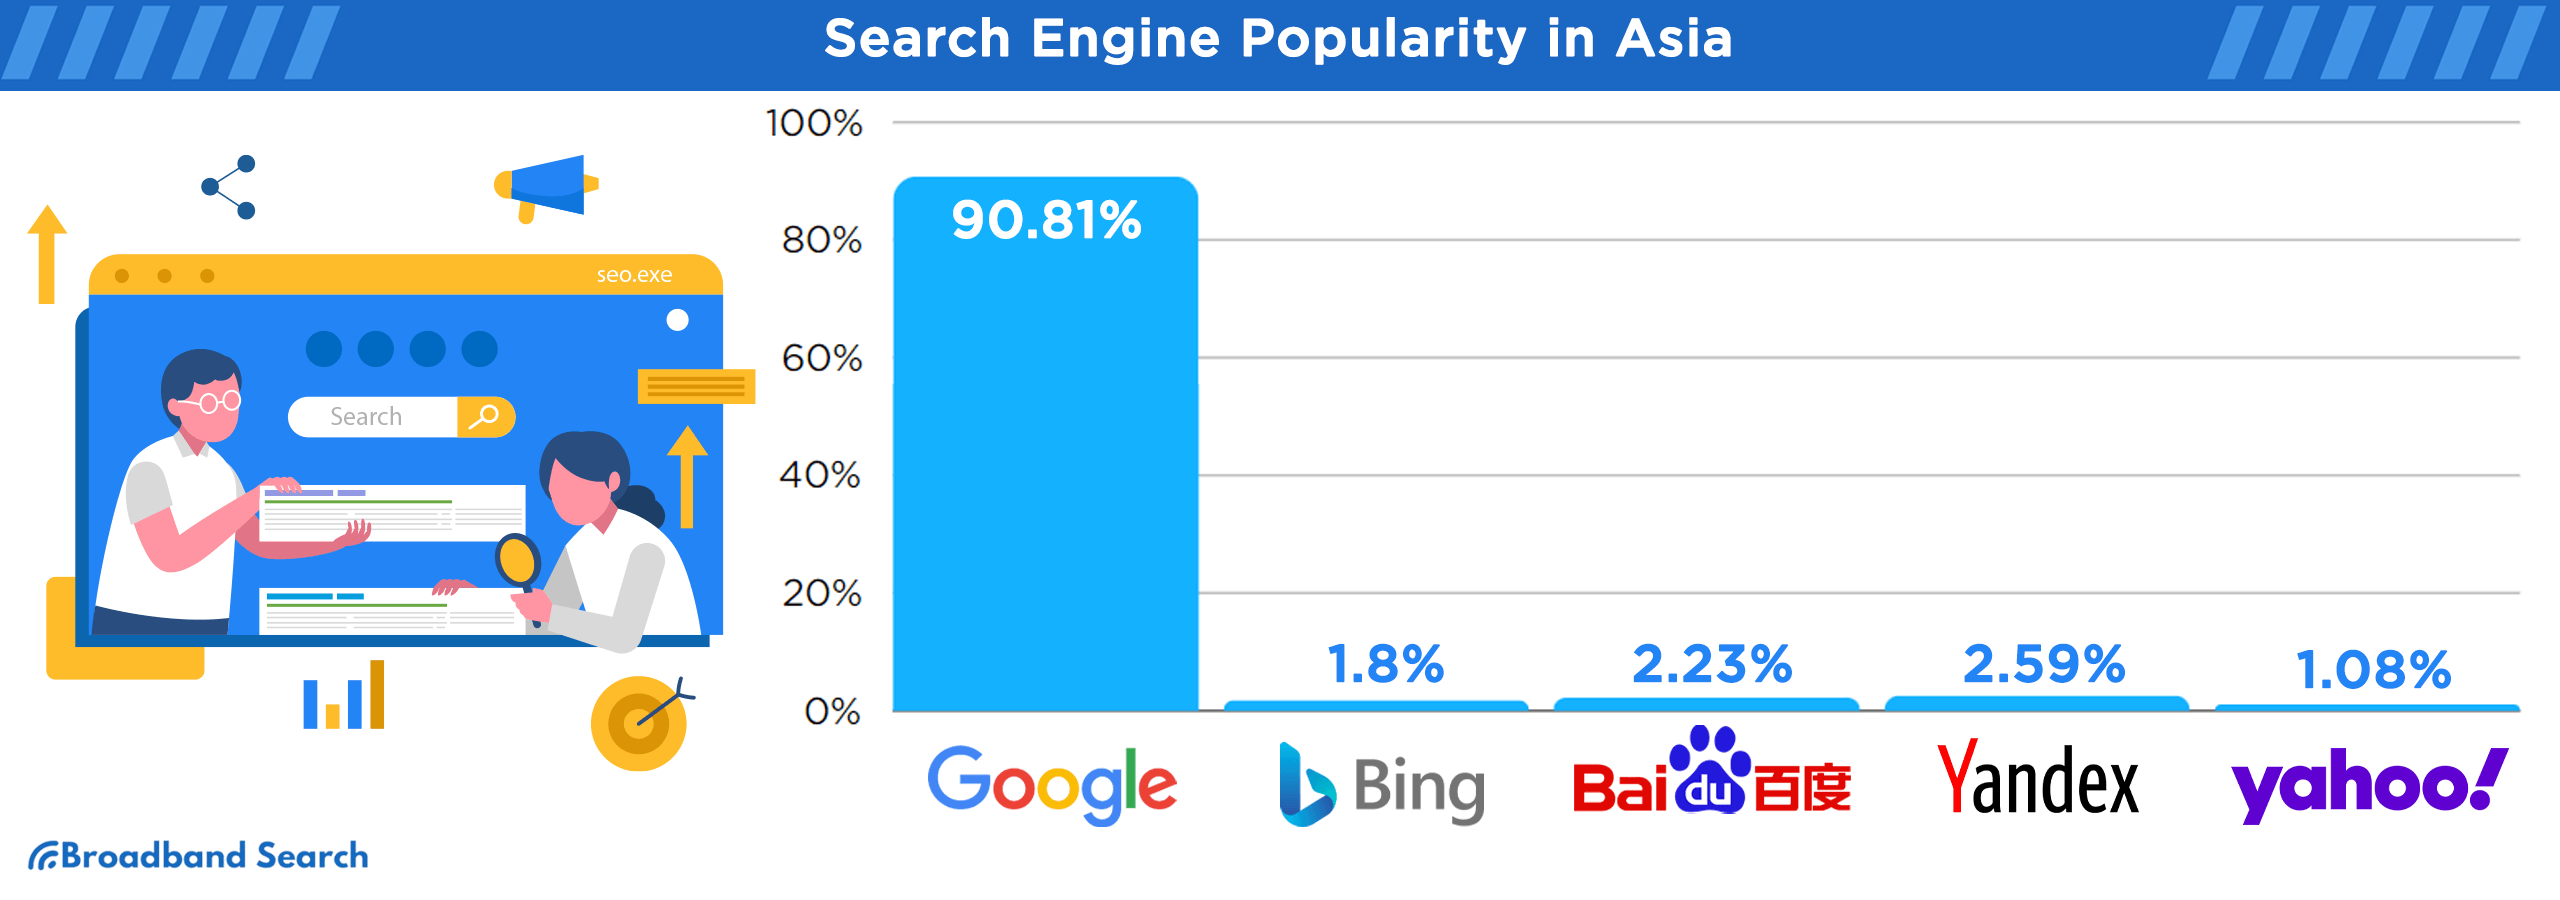 Search engine popularity in Asia